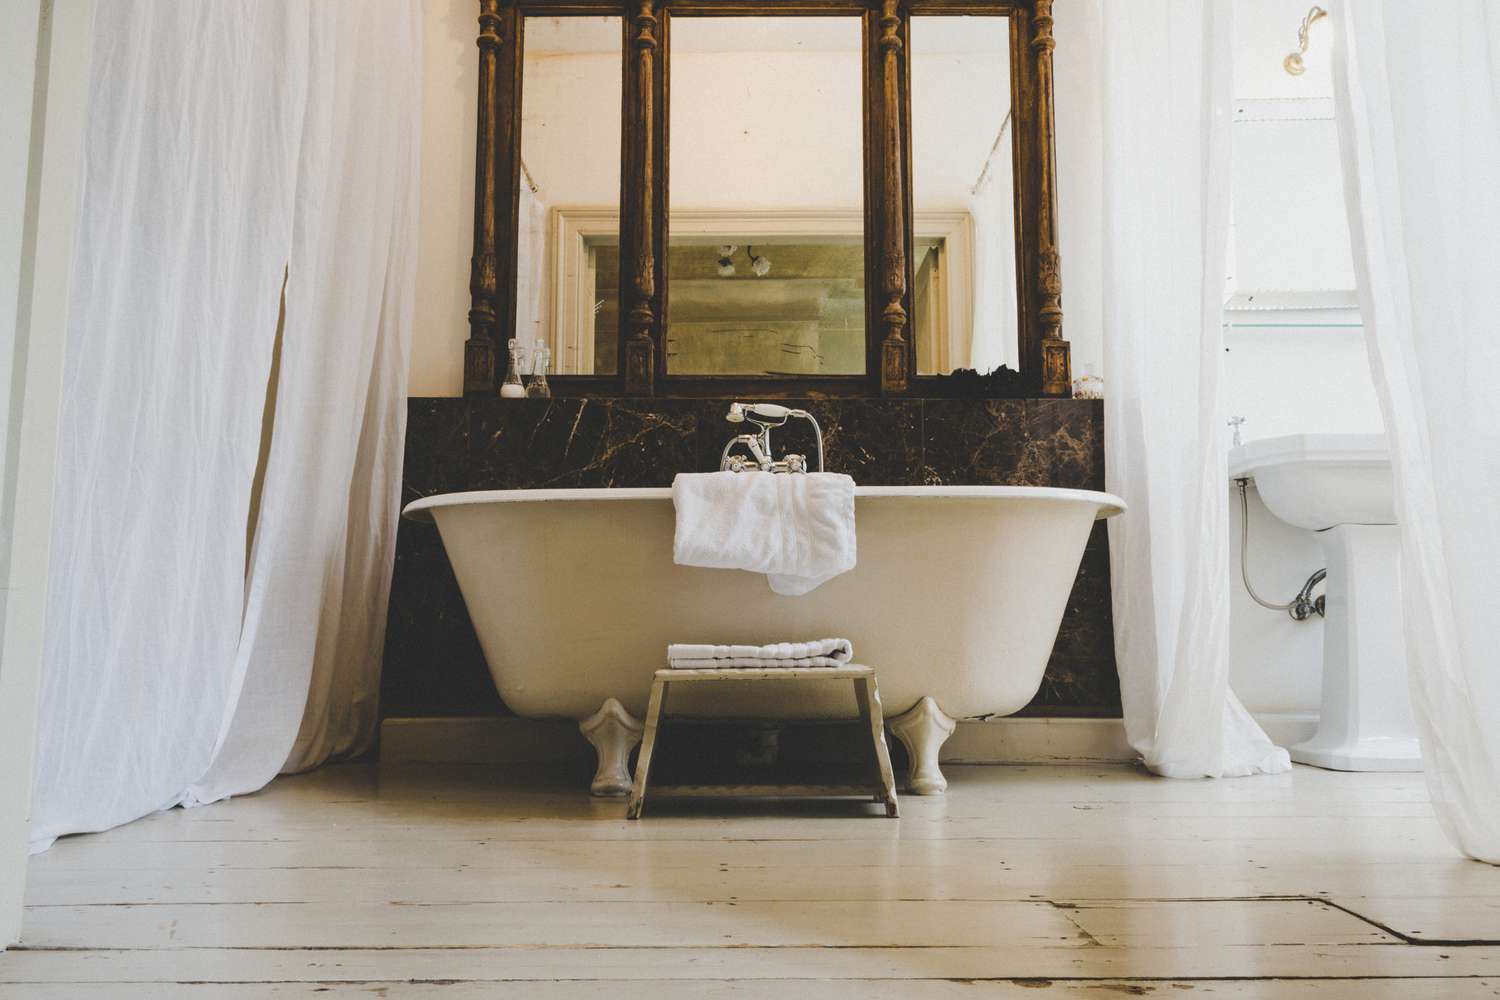 Low angle view of a clawfoot bathtub